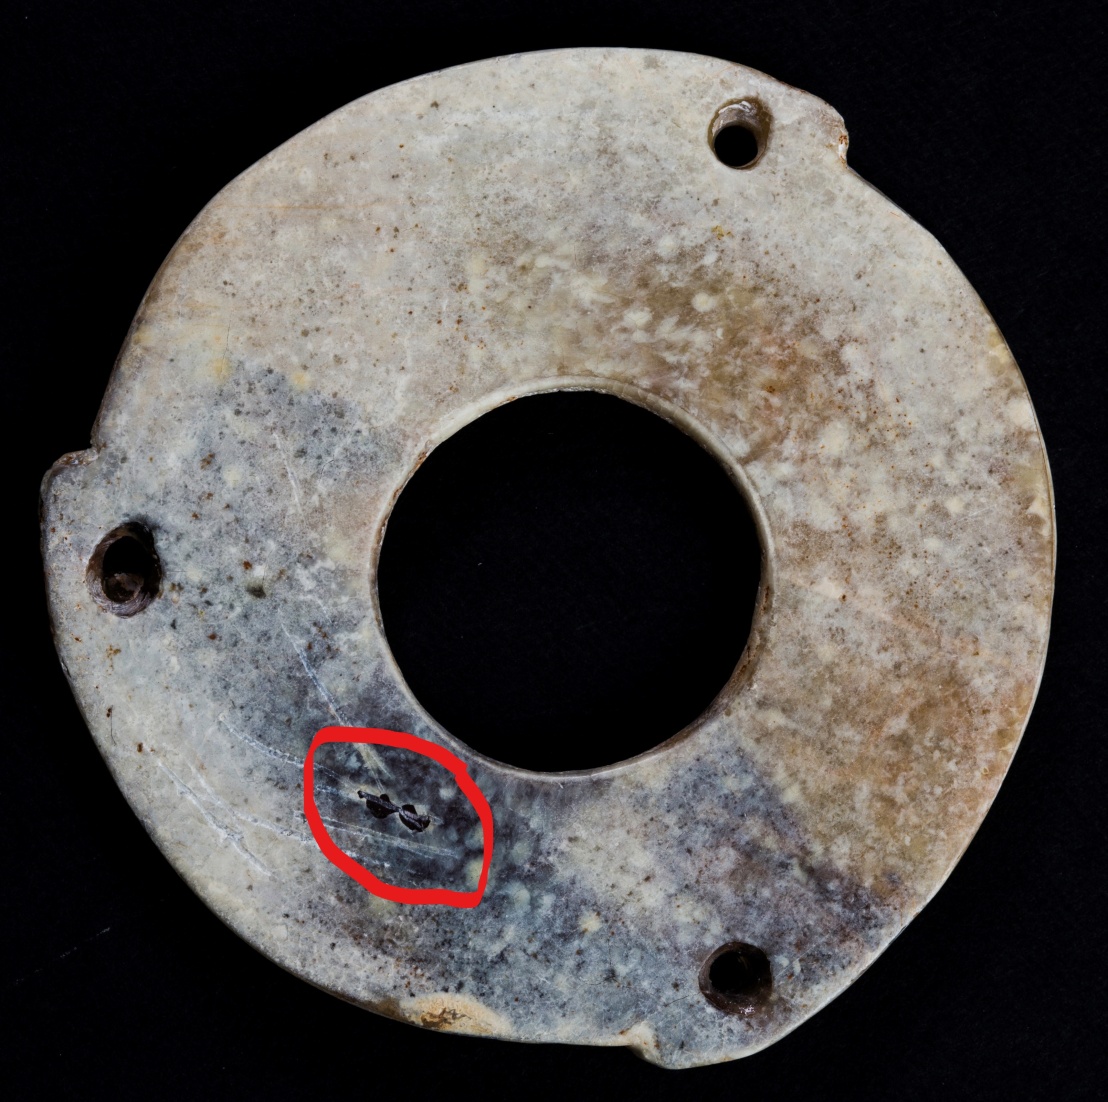 The backside of the Liangzhu disc.